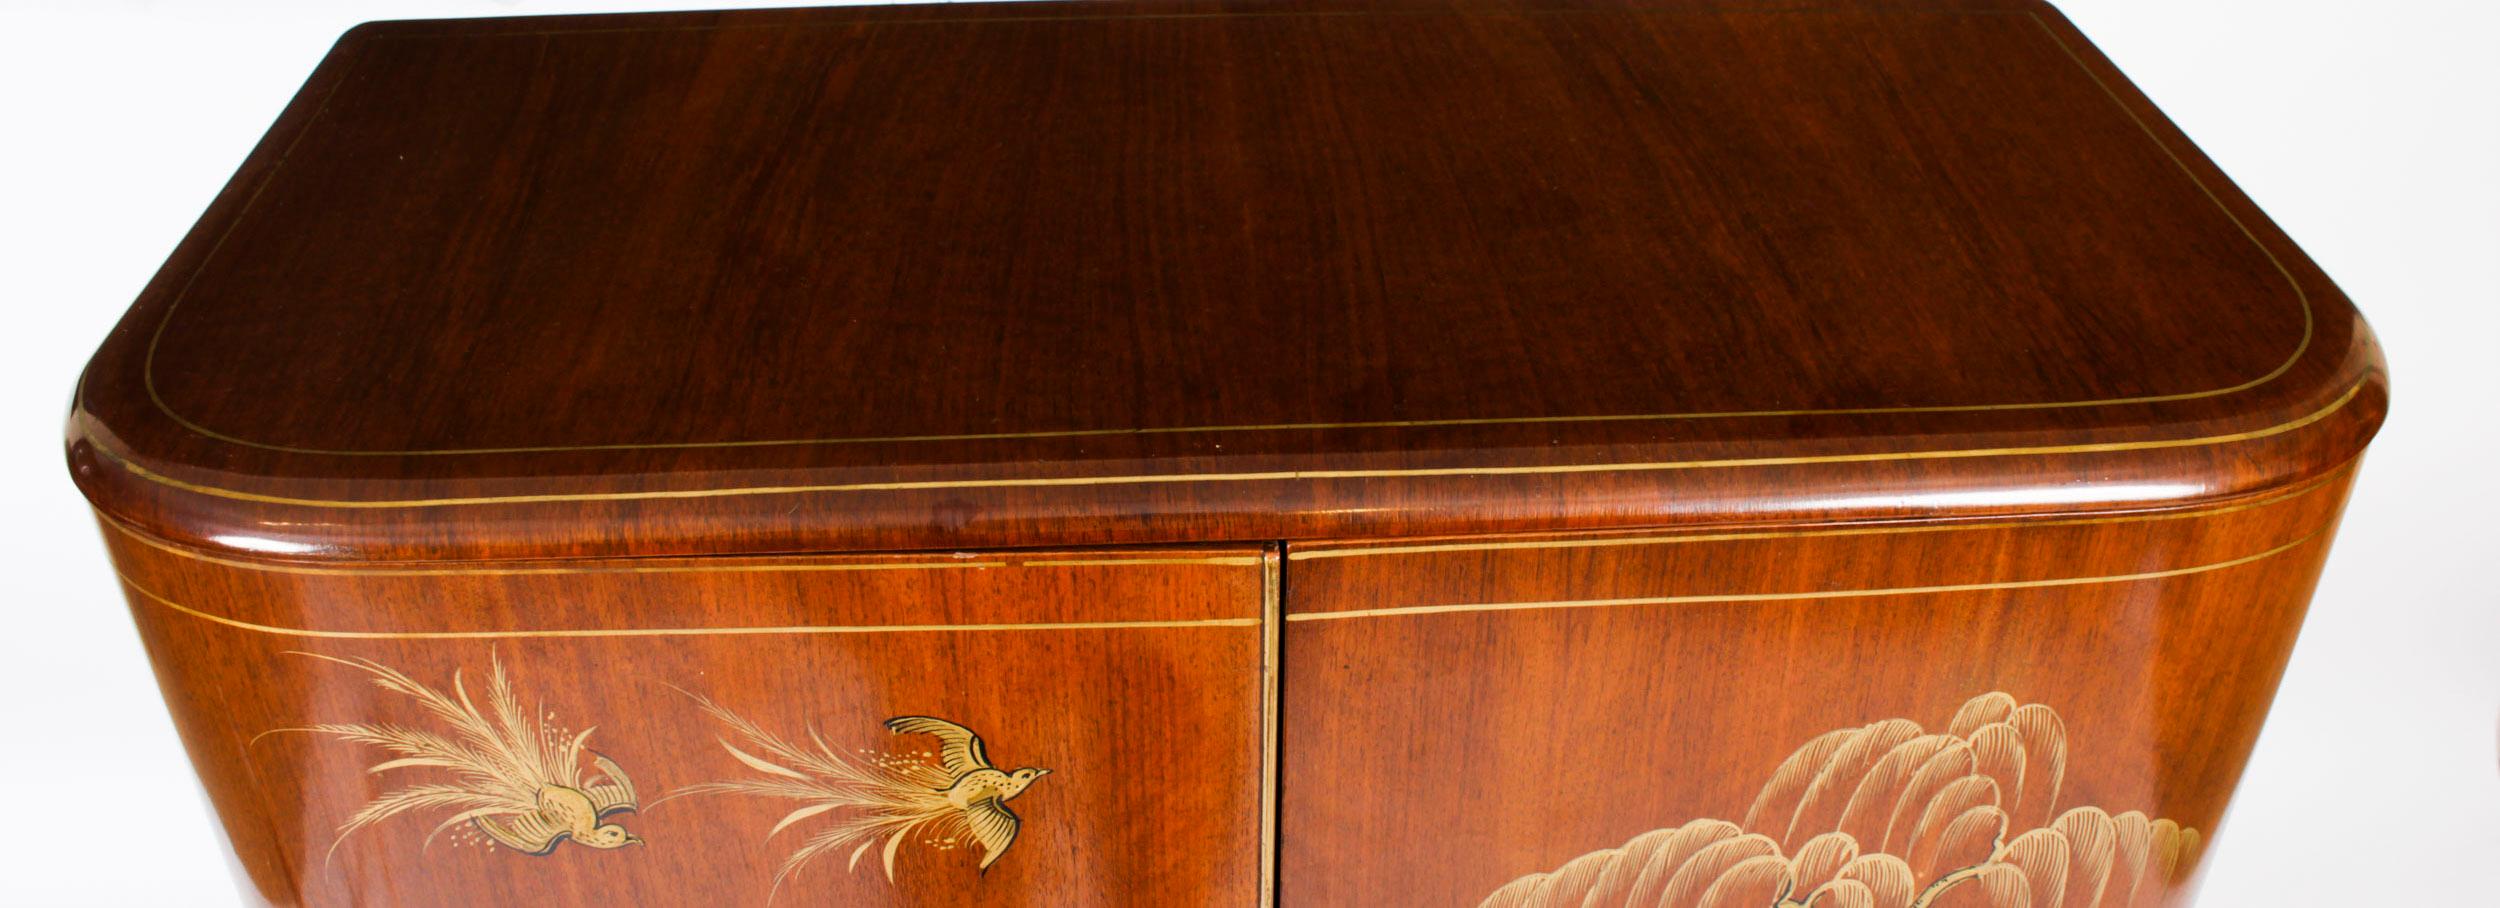 Antique Art Deco Chinoiserie Cocktail Cabinet Dry Bar Harrods Early 20th Century 5